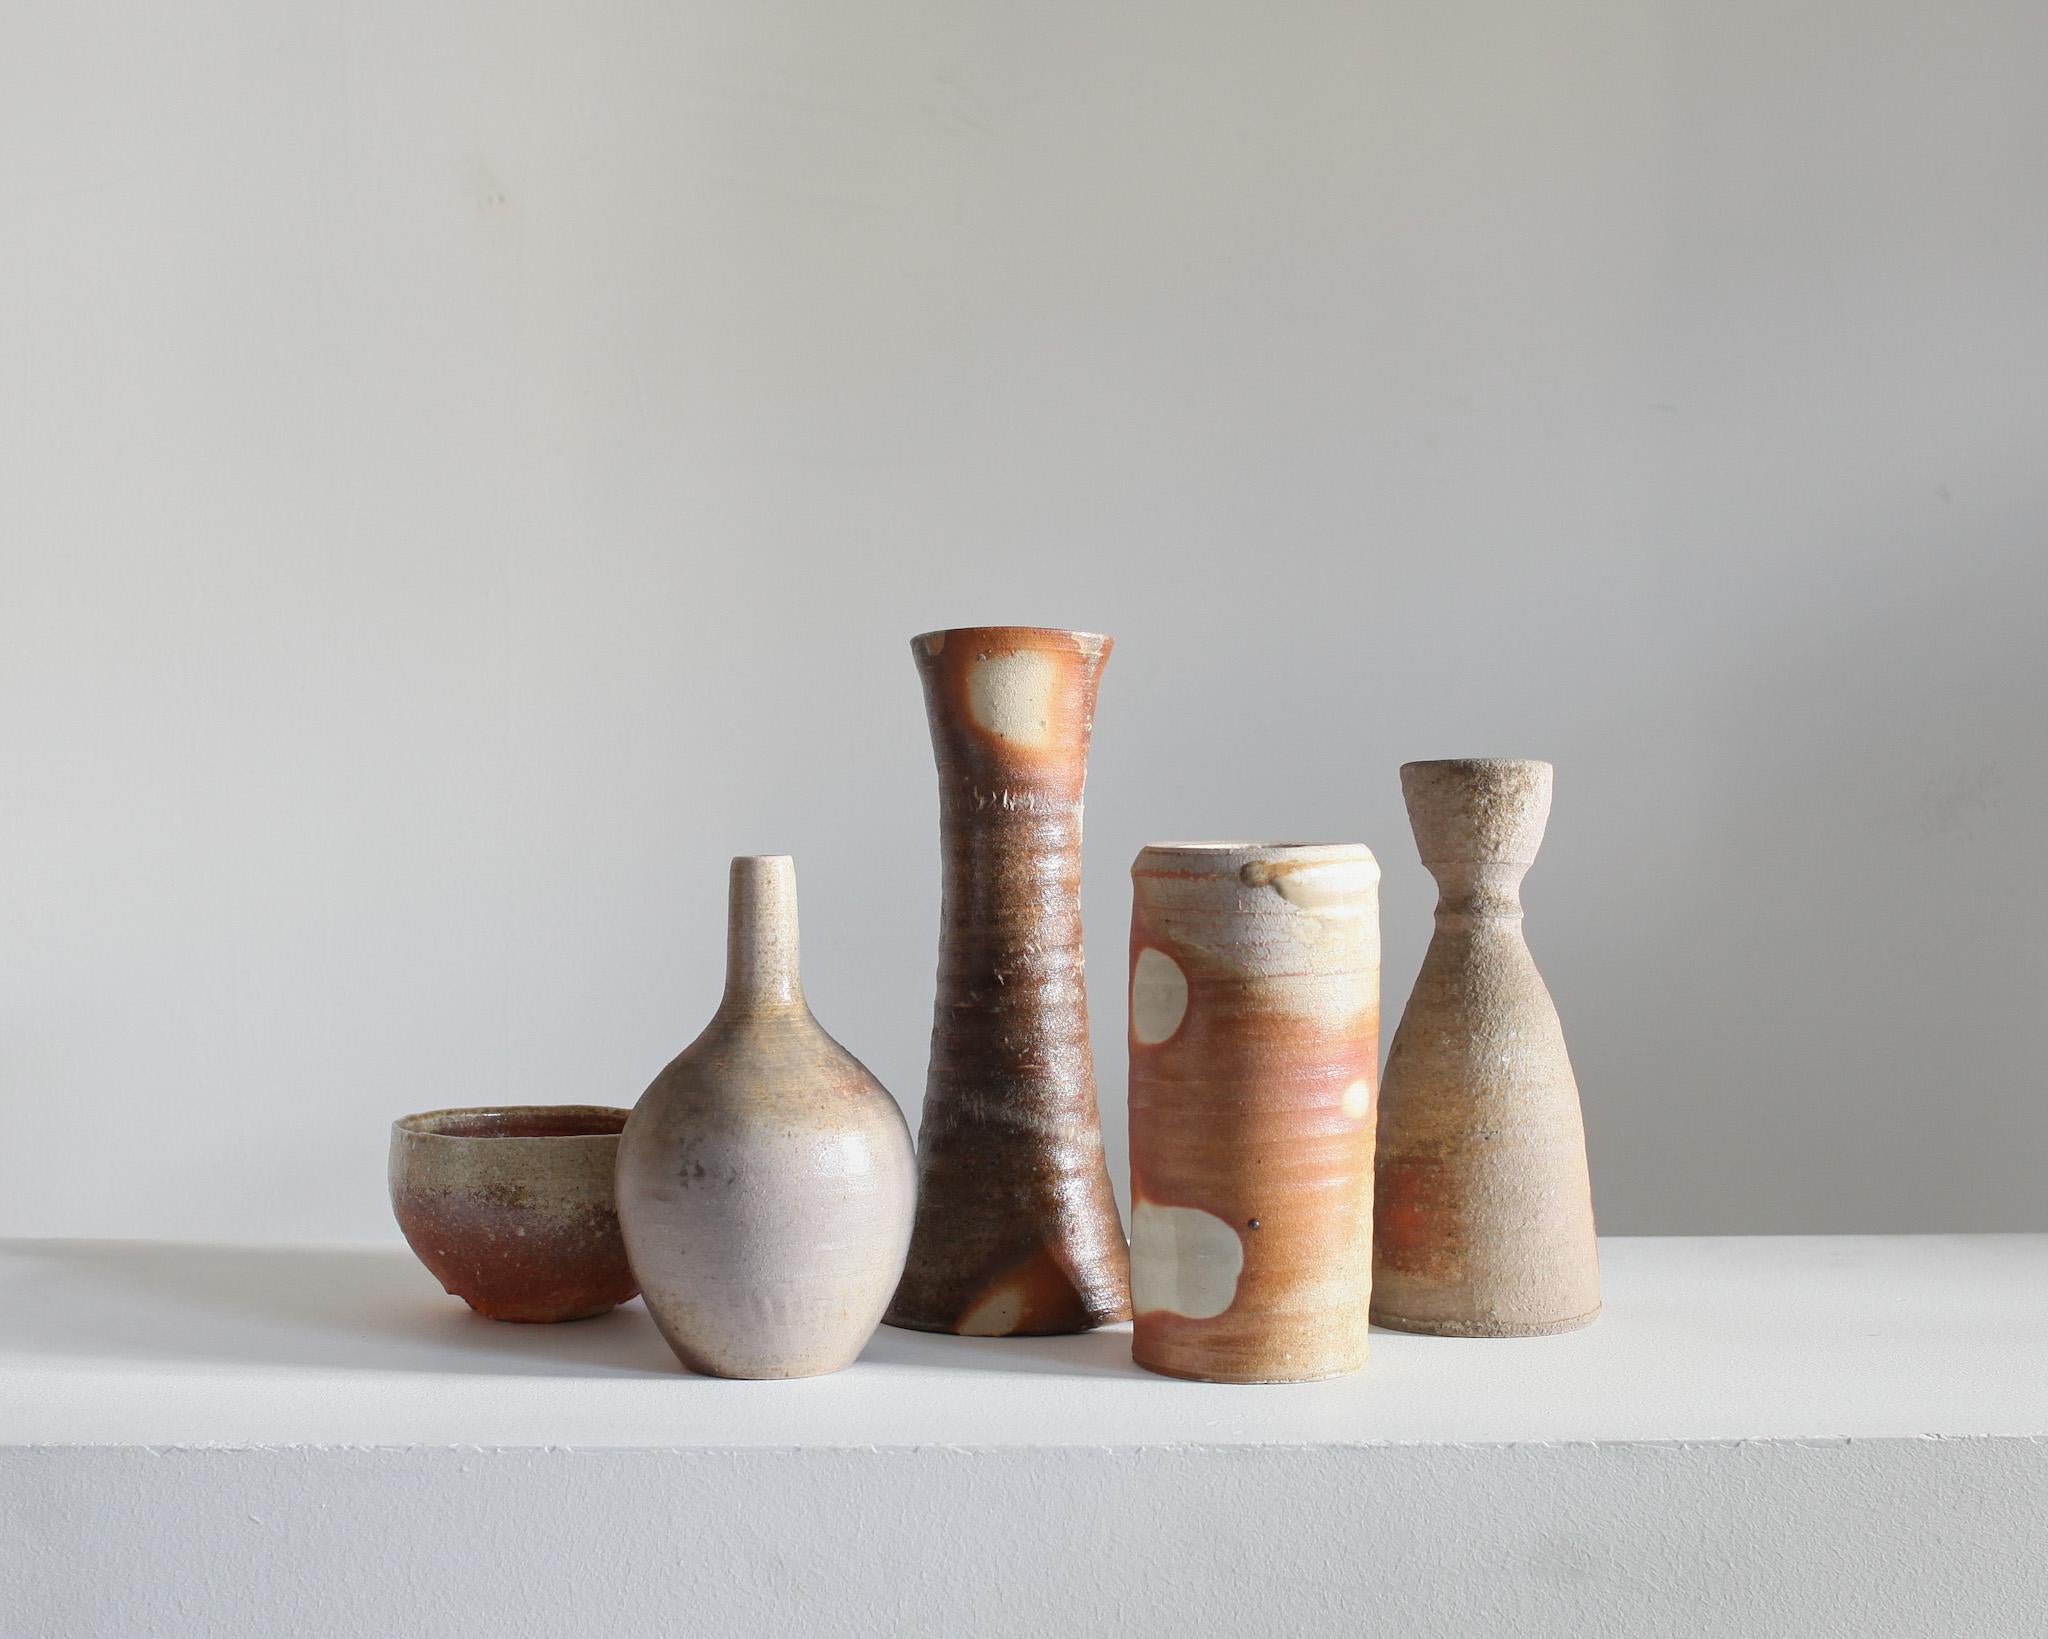 A collection of five unique stoneware/ceramic vessels from the famous pottery town of Mashiko, Japan.

Sourced from the former studio of a Mashiko lifetime potter.

These tactile vessels all display an earthy wabi-sabi aesthetic.

Most of the